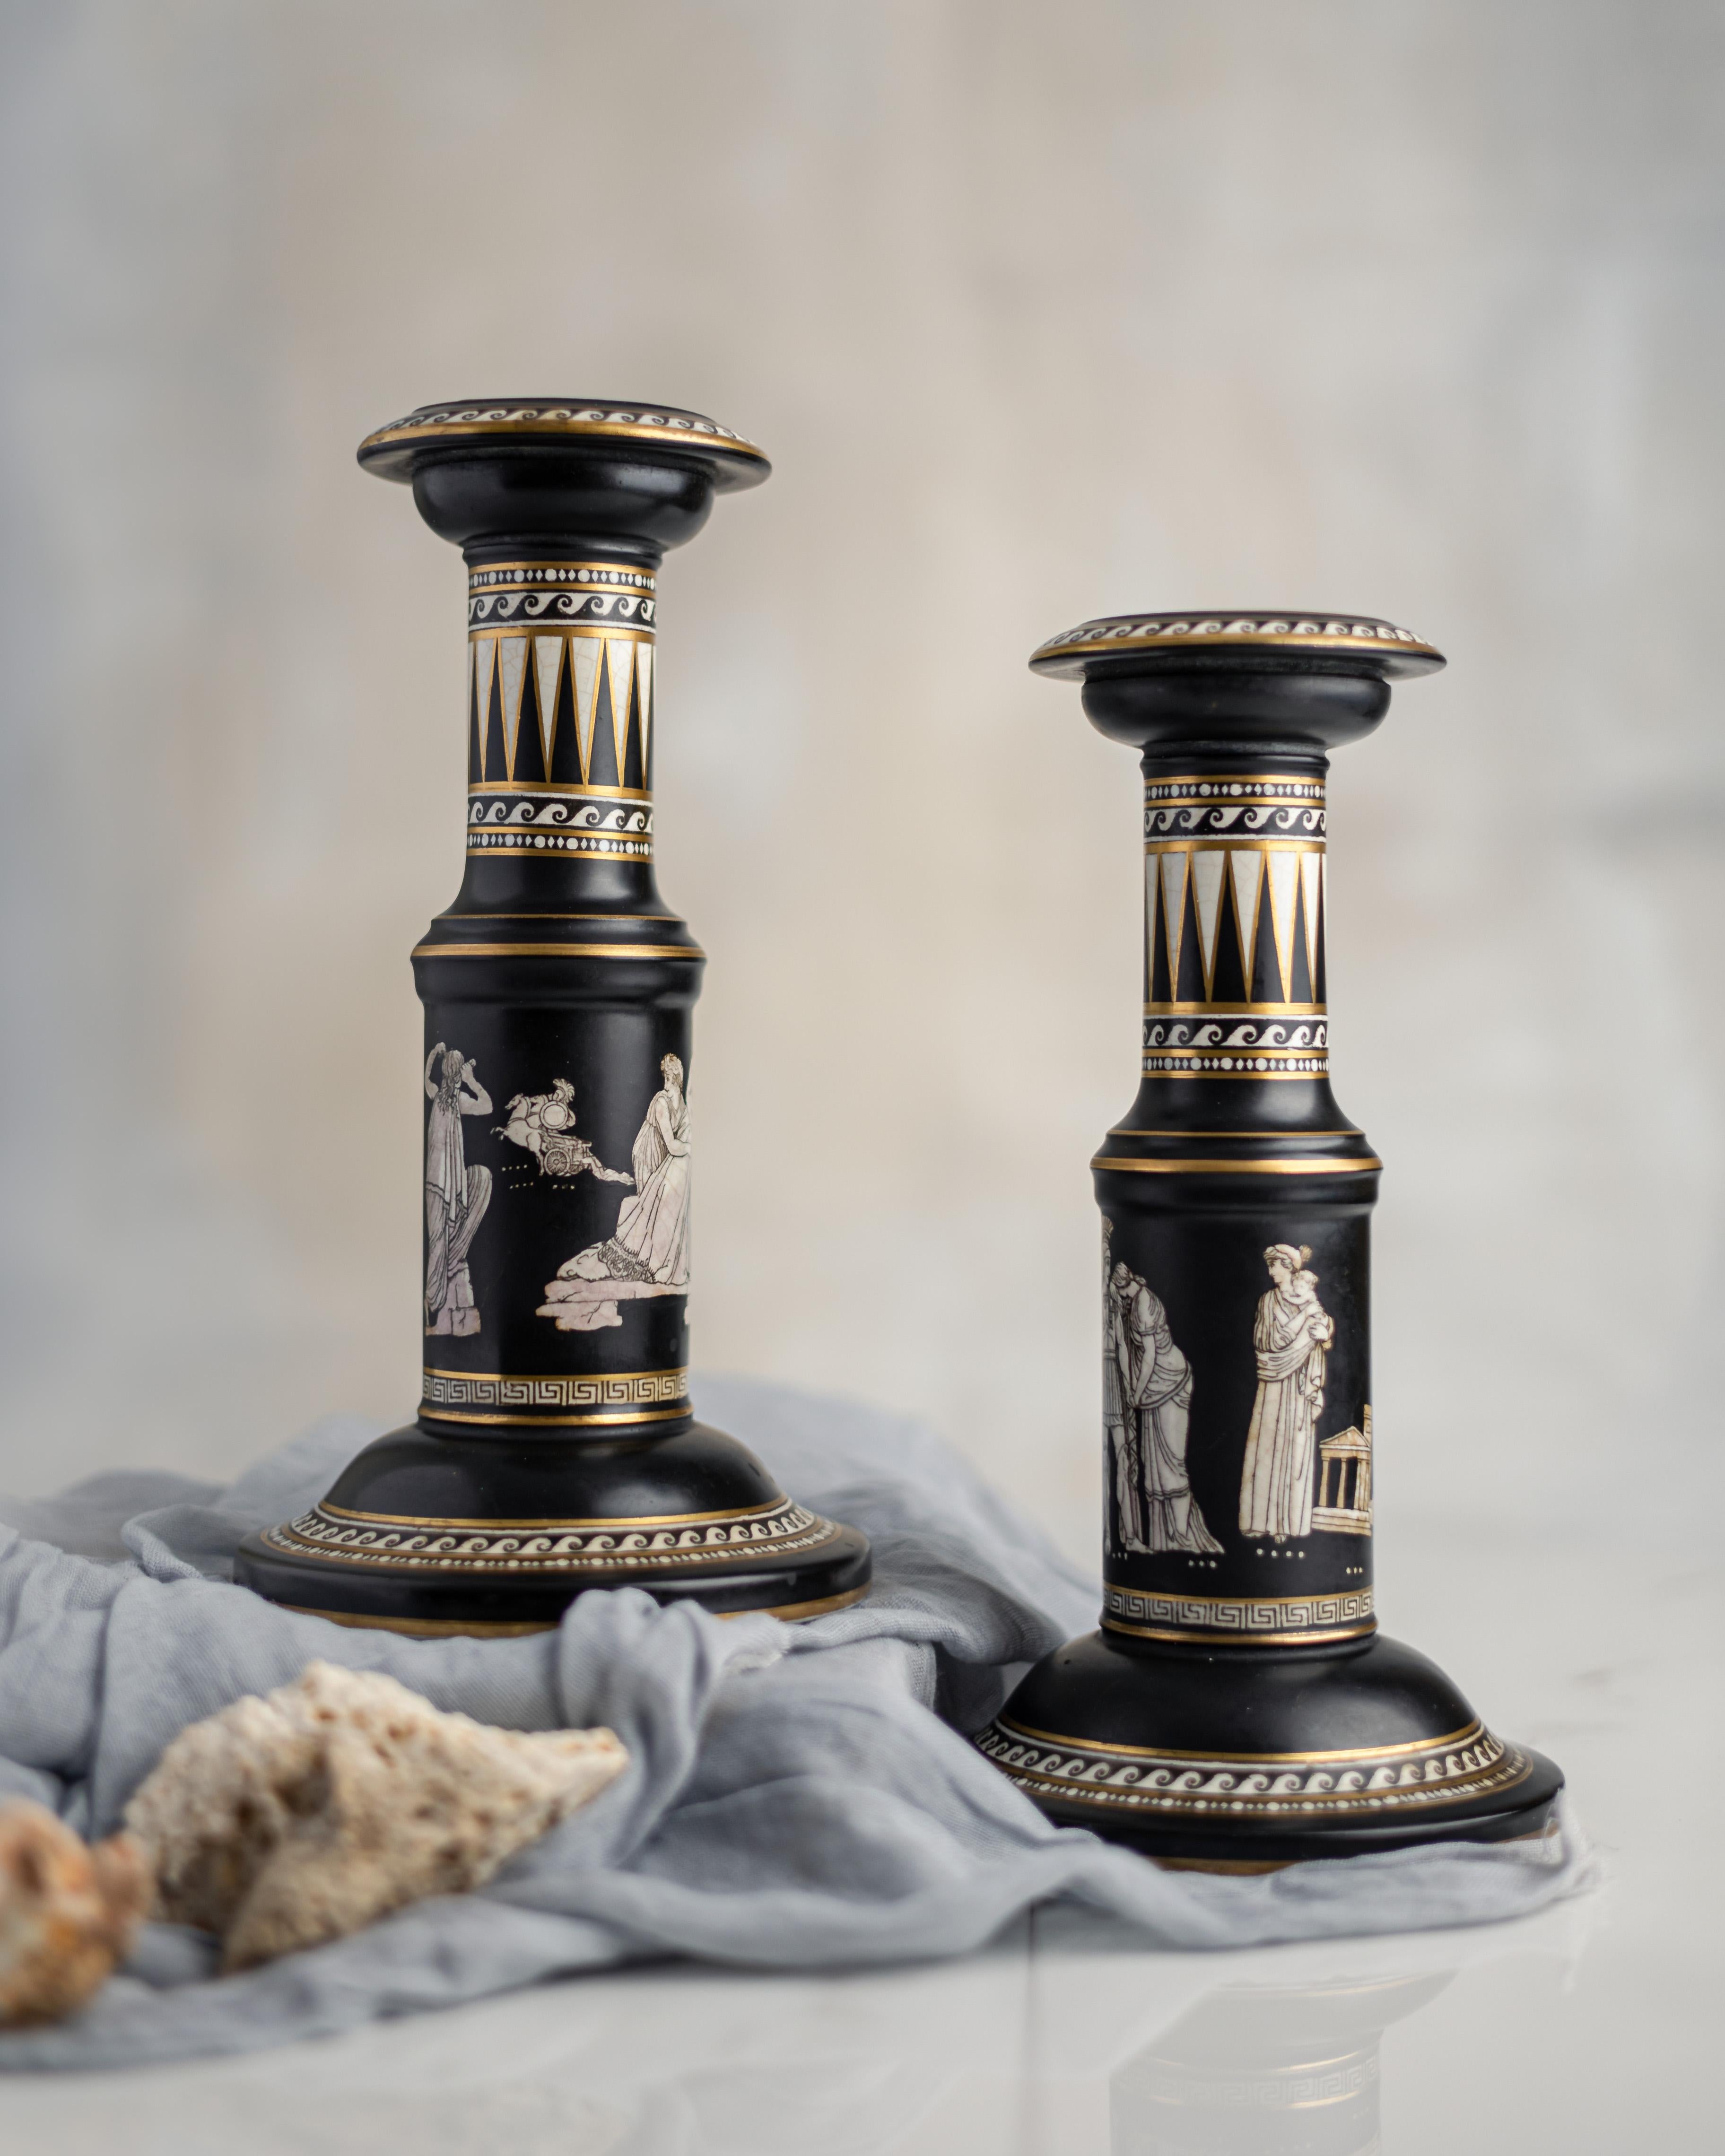 A pair of monumental black and white neoclassical pottery candlesticks made by Pratt, Fenton in the Old Greek pattern in the late 19th century.

Staffordshire potters Felix and Richard Pratt’s ‘Old Greek’ pattern demonstrates the lasting influence